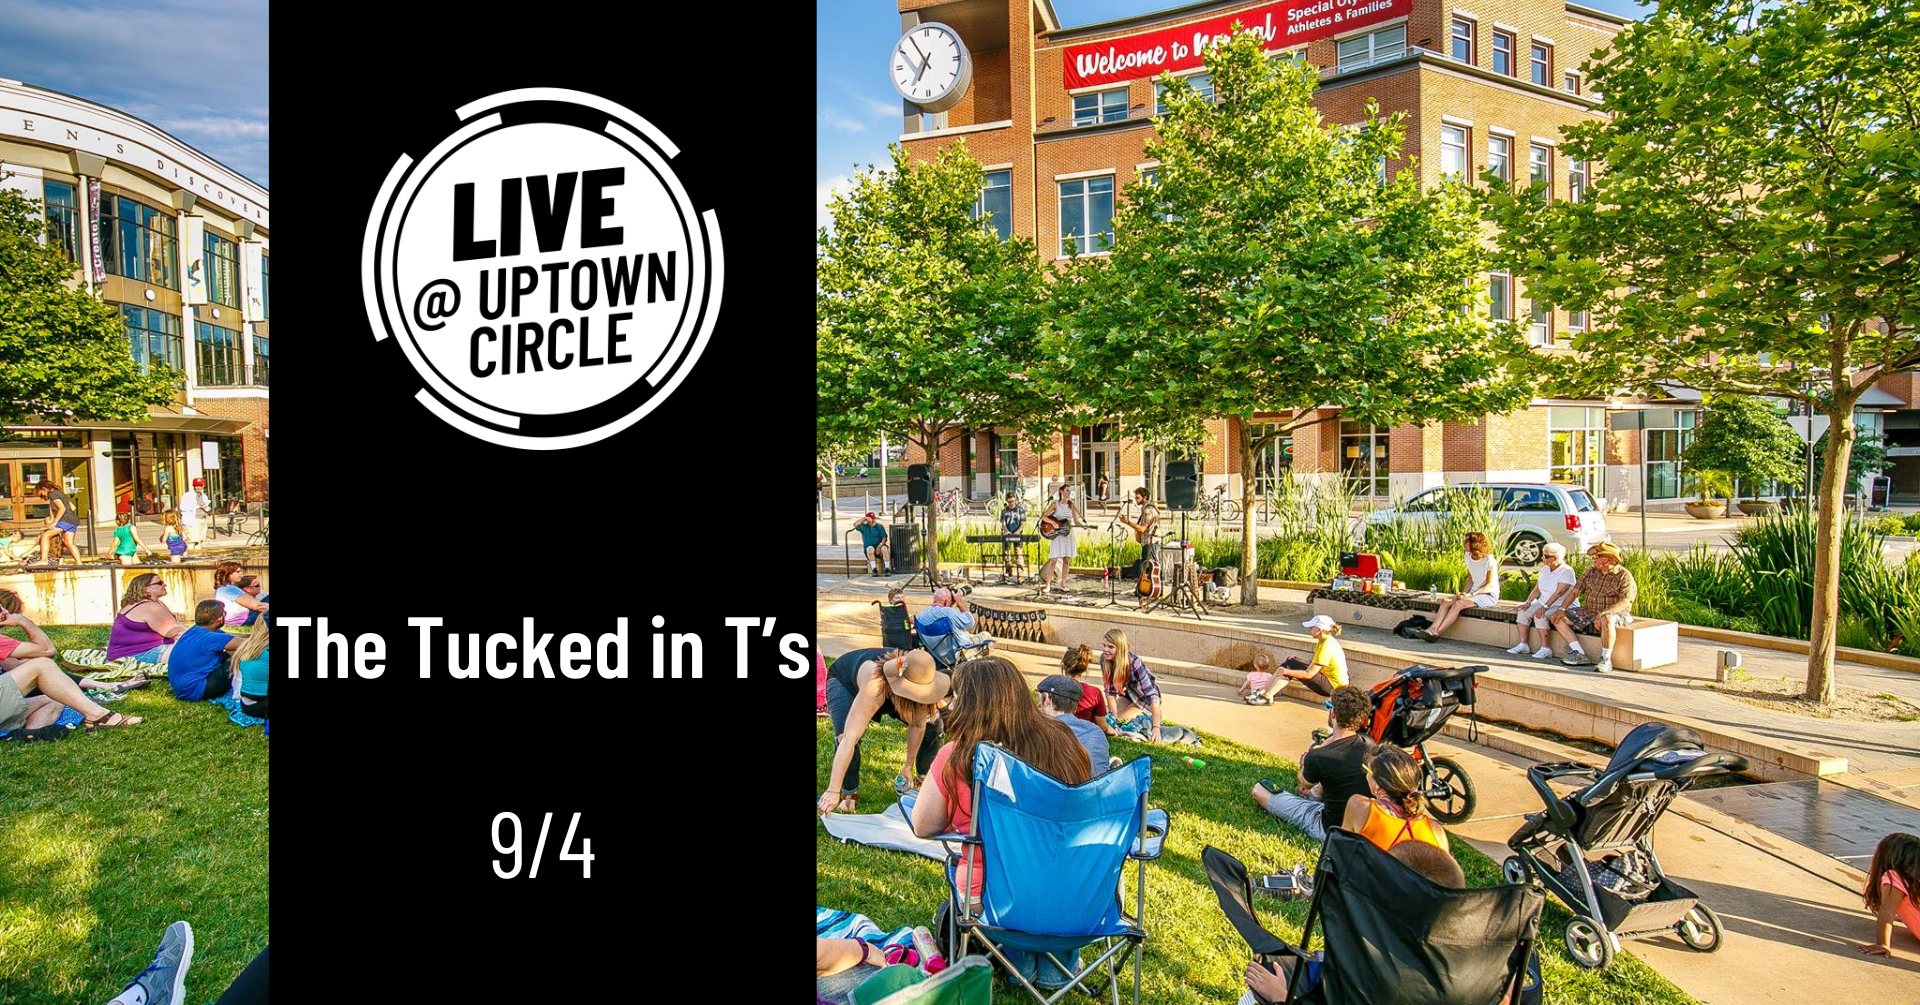 Normal LIVE presents The Tucked in T's @ Uptown Circle